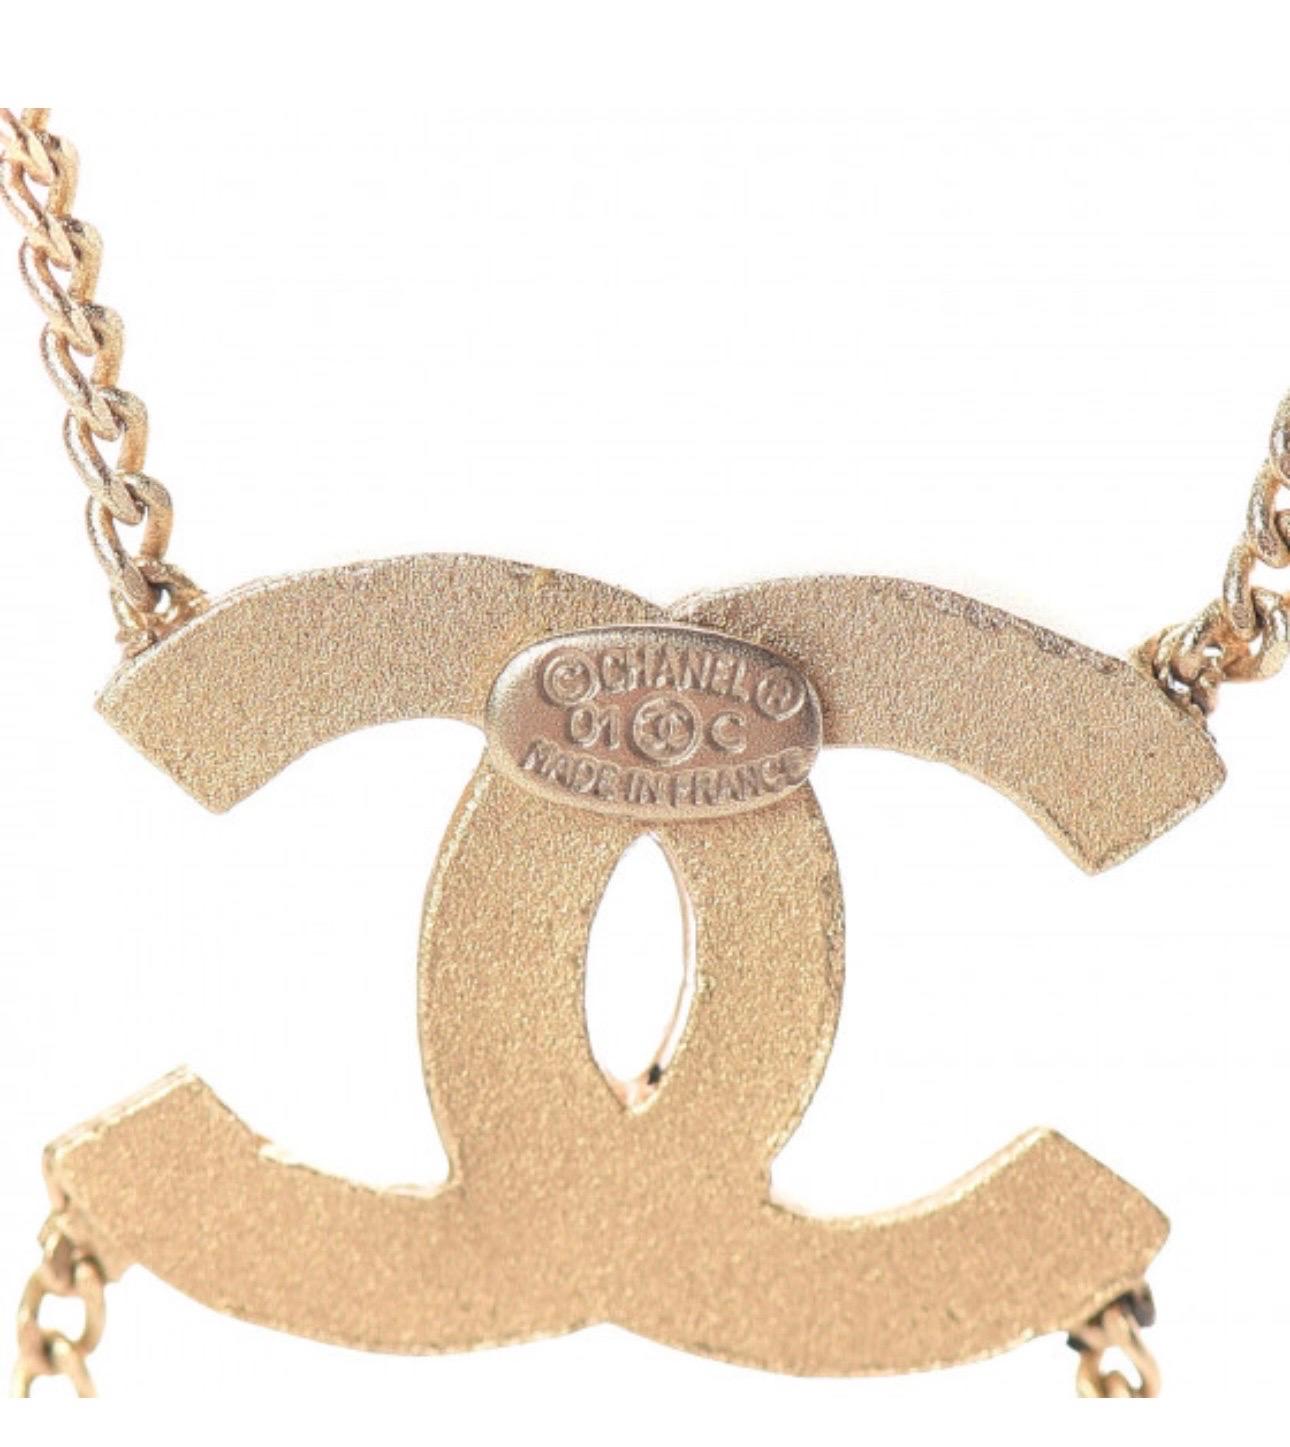 Authentic CHANEL Rhinestone CC LOGO 5 & 19 Pendant Necklace Vintage, Estate In Excellent Condition For Sale In New York, NY